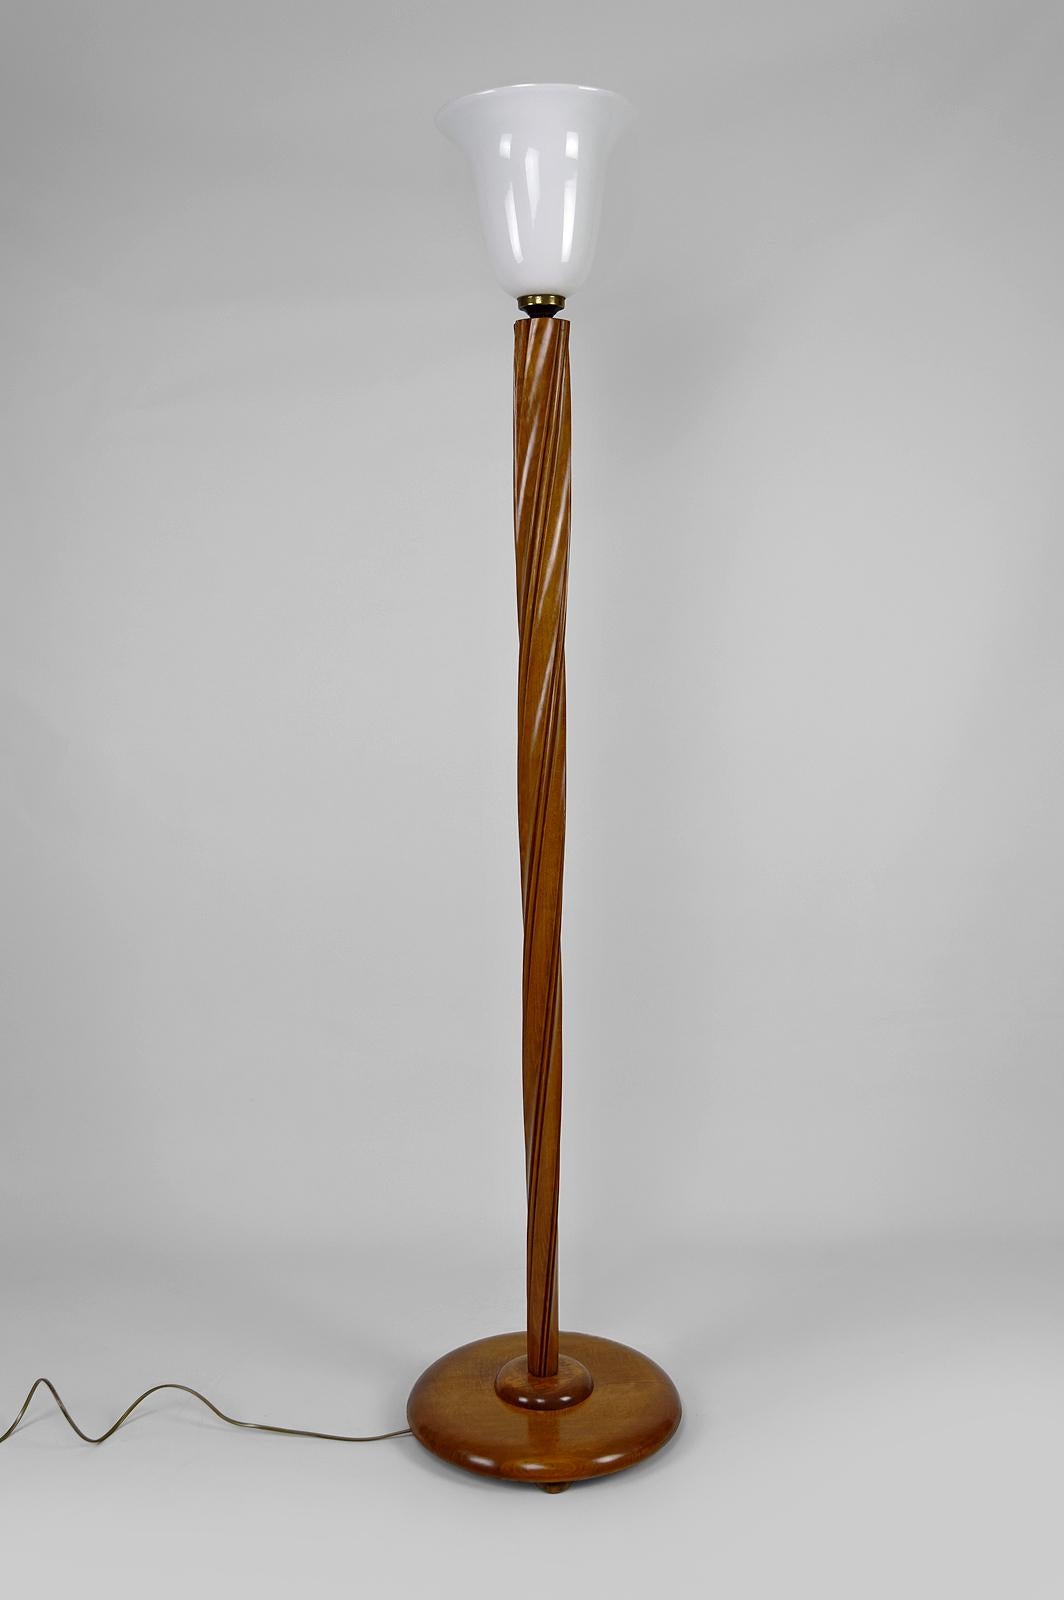 Magnificent living room floor lamp in wood (beech), with a body in the shape of a helix (helical) resting on a circular base.
Diffuser in white opaline reminiscent of Mazda productions.

Modernist Art Deco style, France, circa 1930-1940.

In